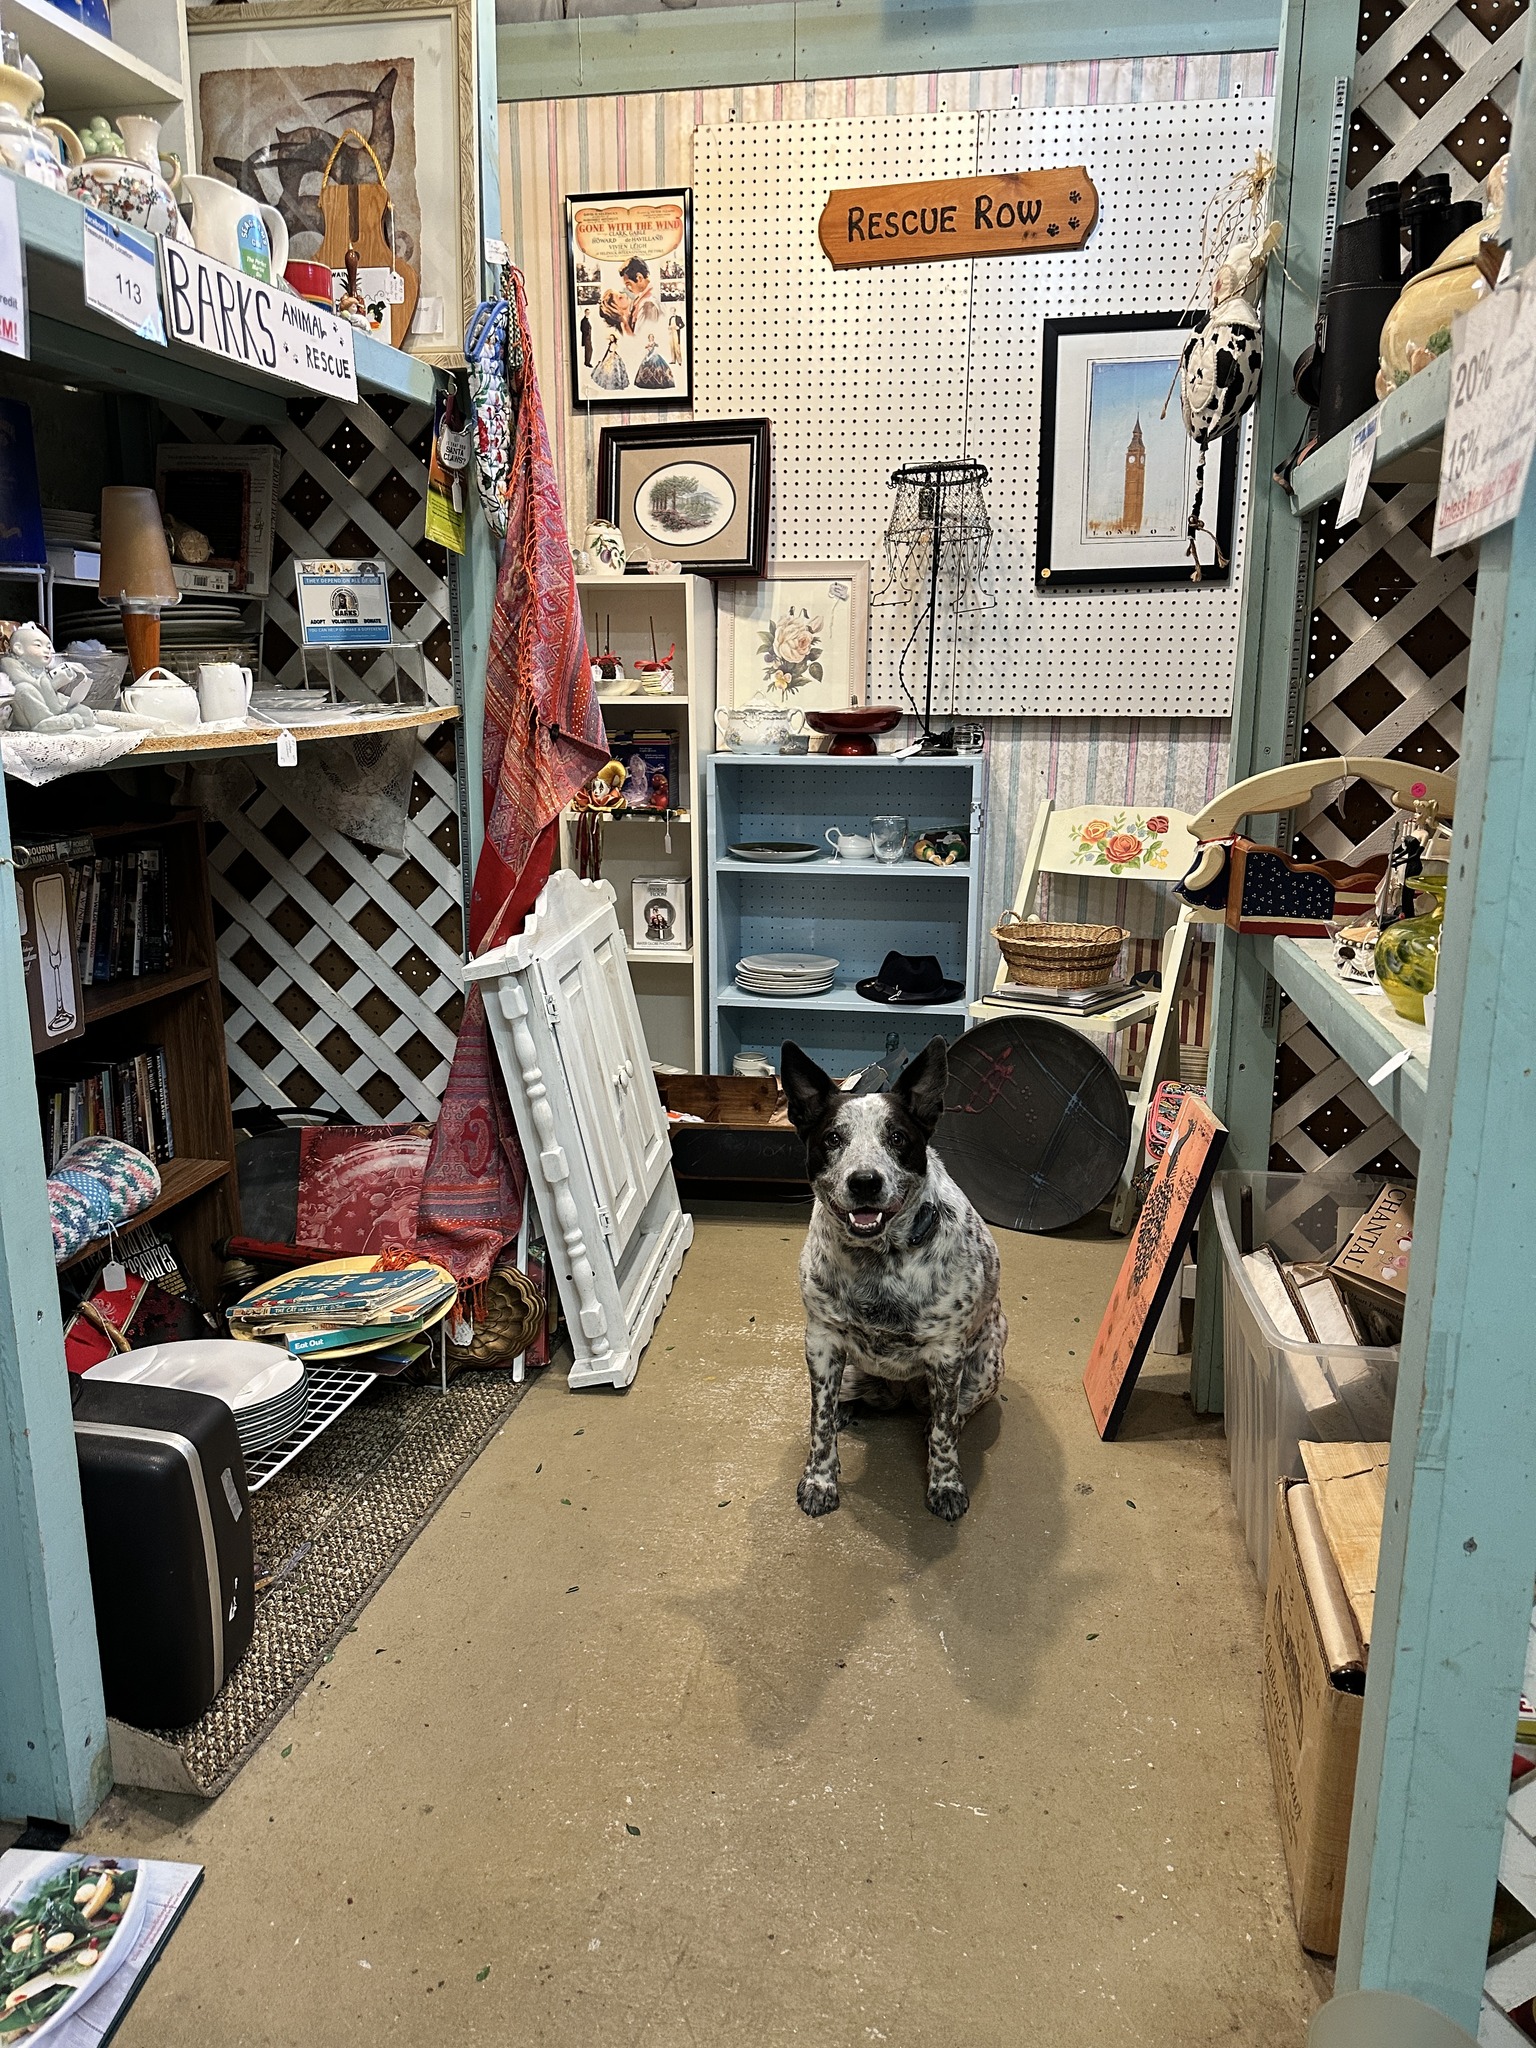 Scranberry Snapshots - Rescue Row! Please visit these booths, they help shelter animals like I used to be! - Scranberry Coop - Vintage Store - Antiques, Collectibles, & More